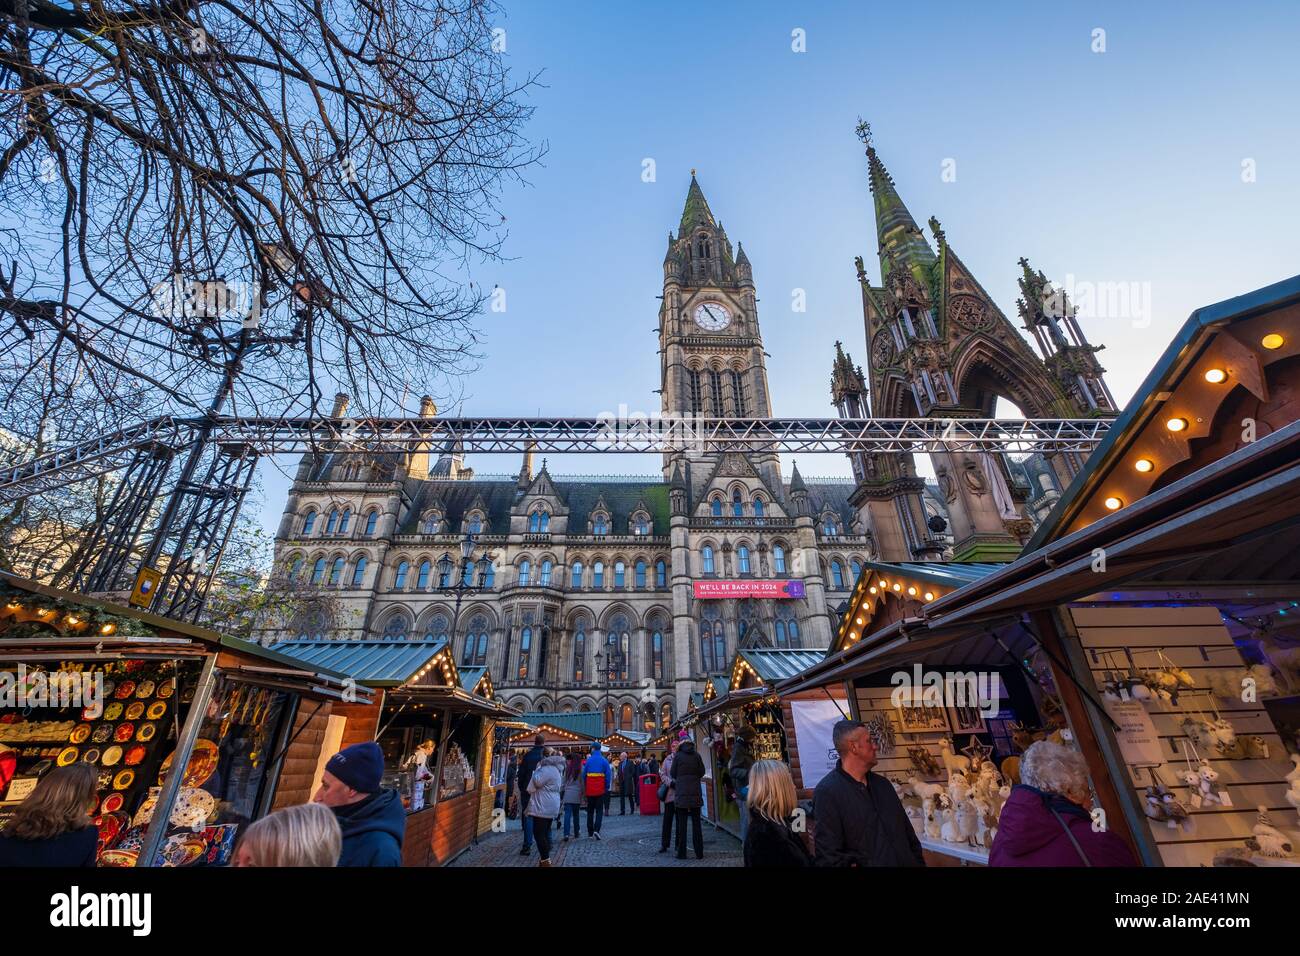 Manchester, United Kingdom - November 29, 2019: Christmas Markets in Albert Square near the Town Hall of Manchester in the nortwest of England Stock Photo